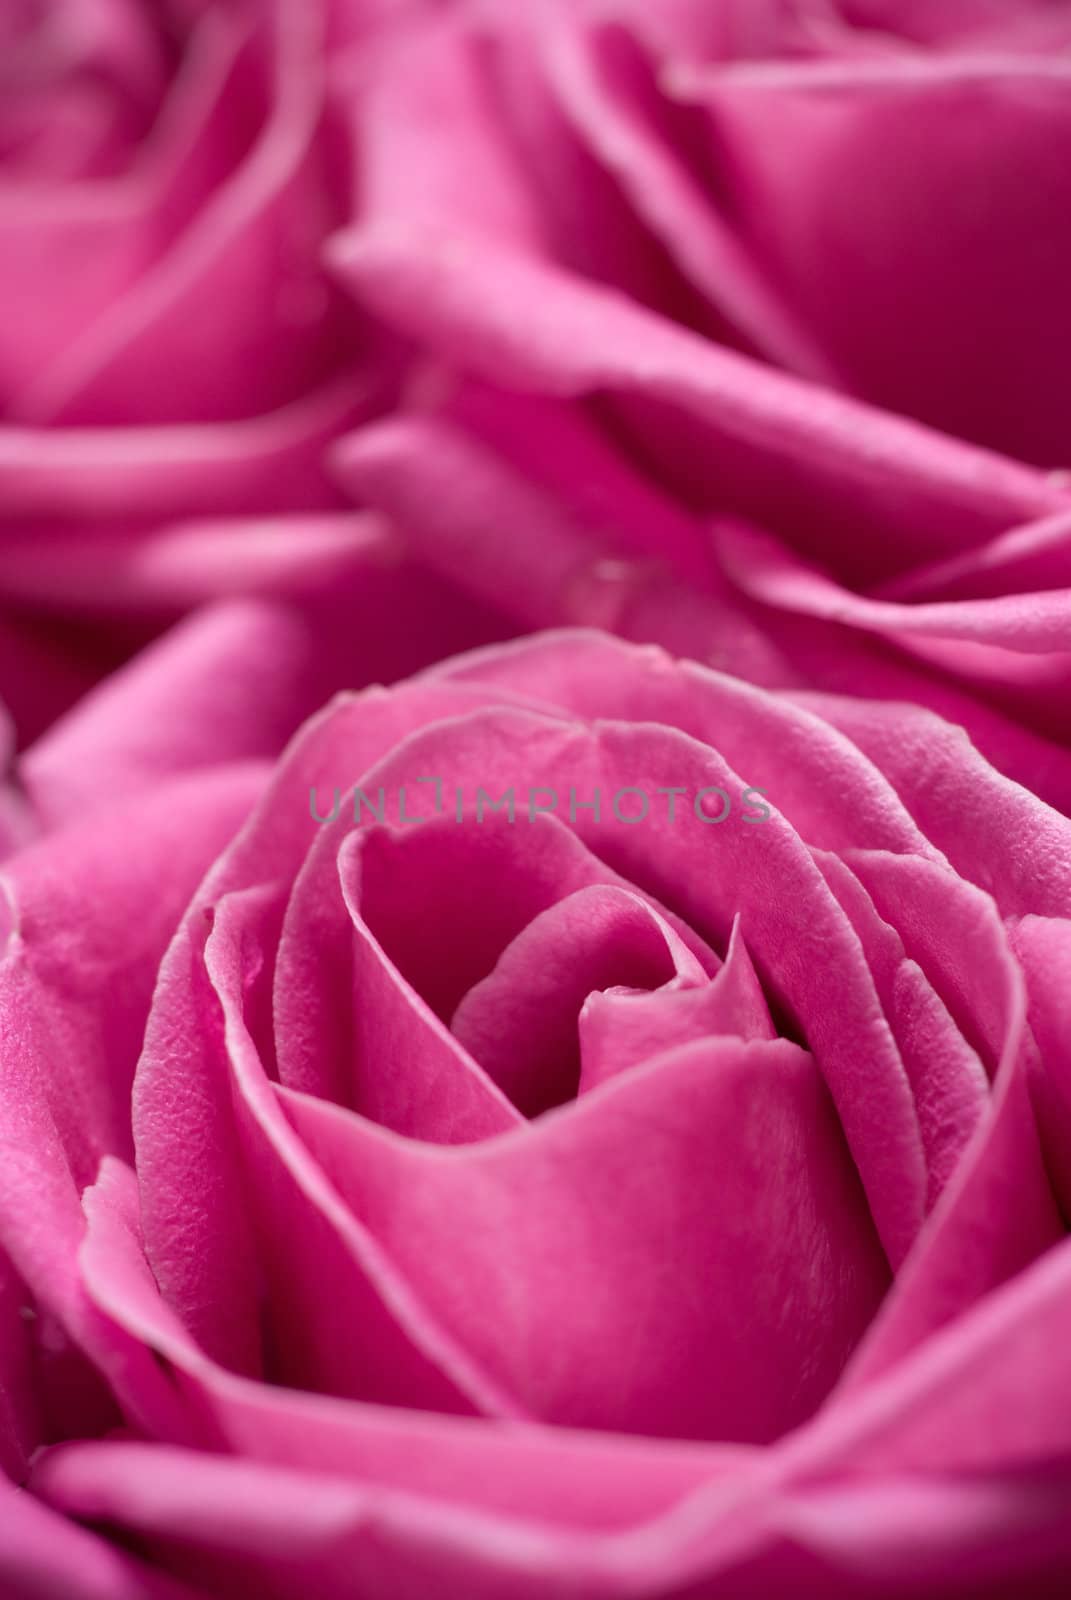 Pink roses - intentional selective focus in the middle of the flower.